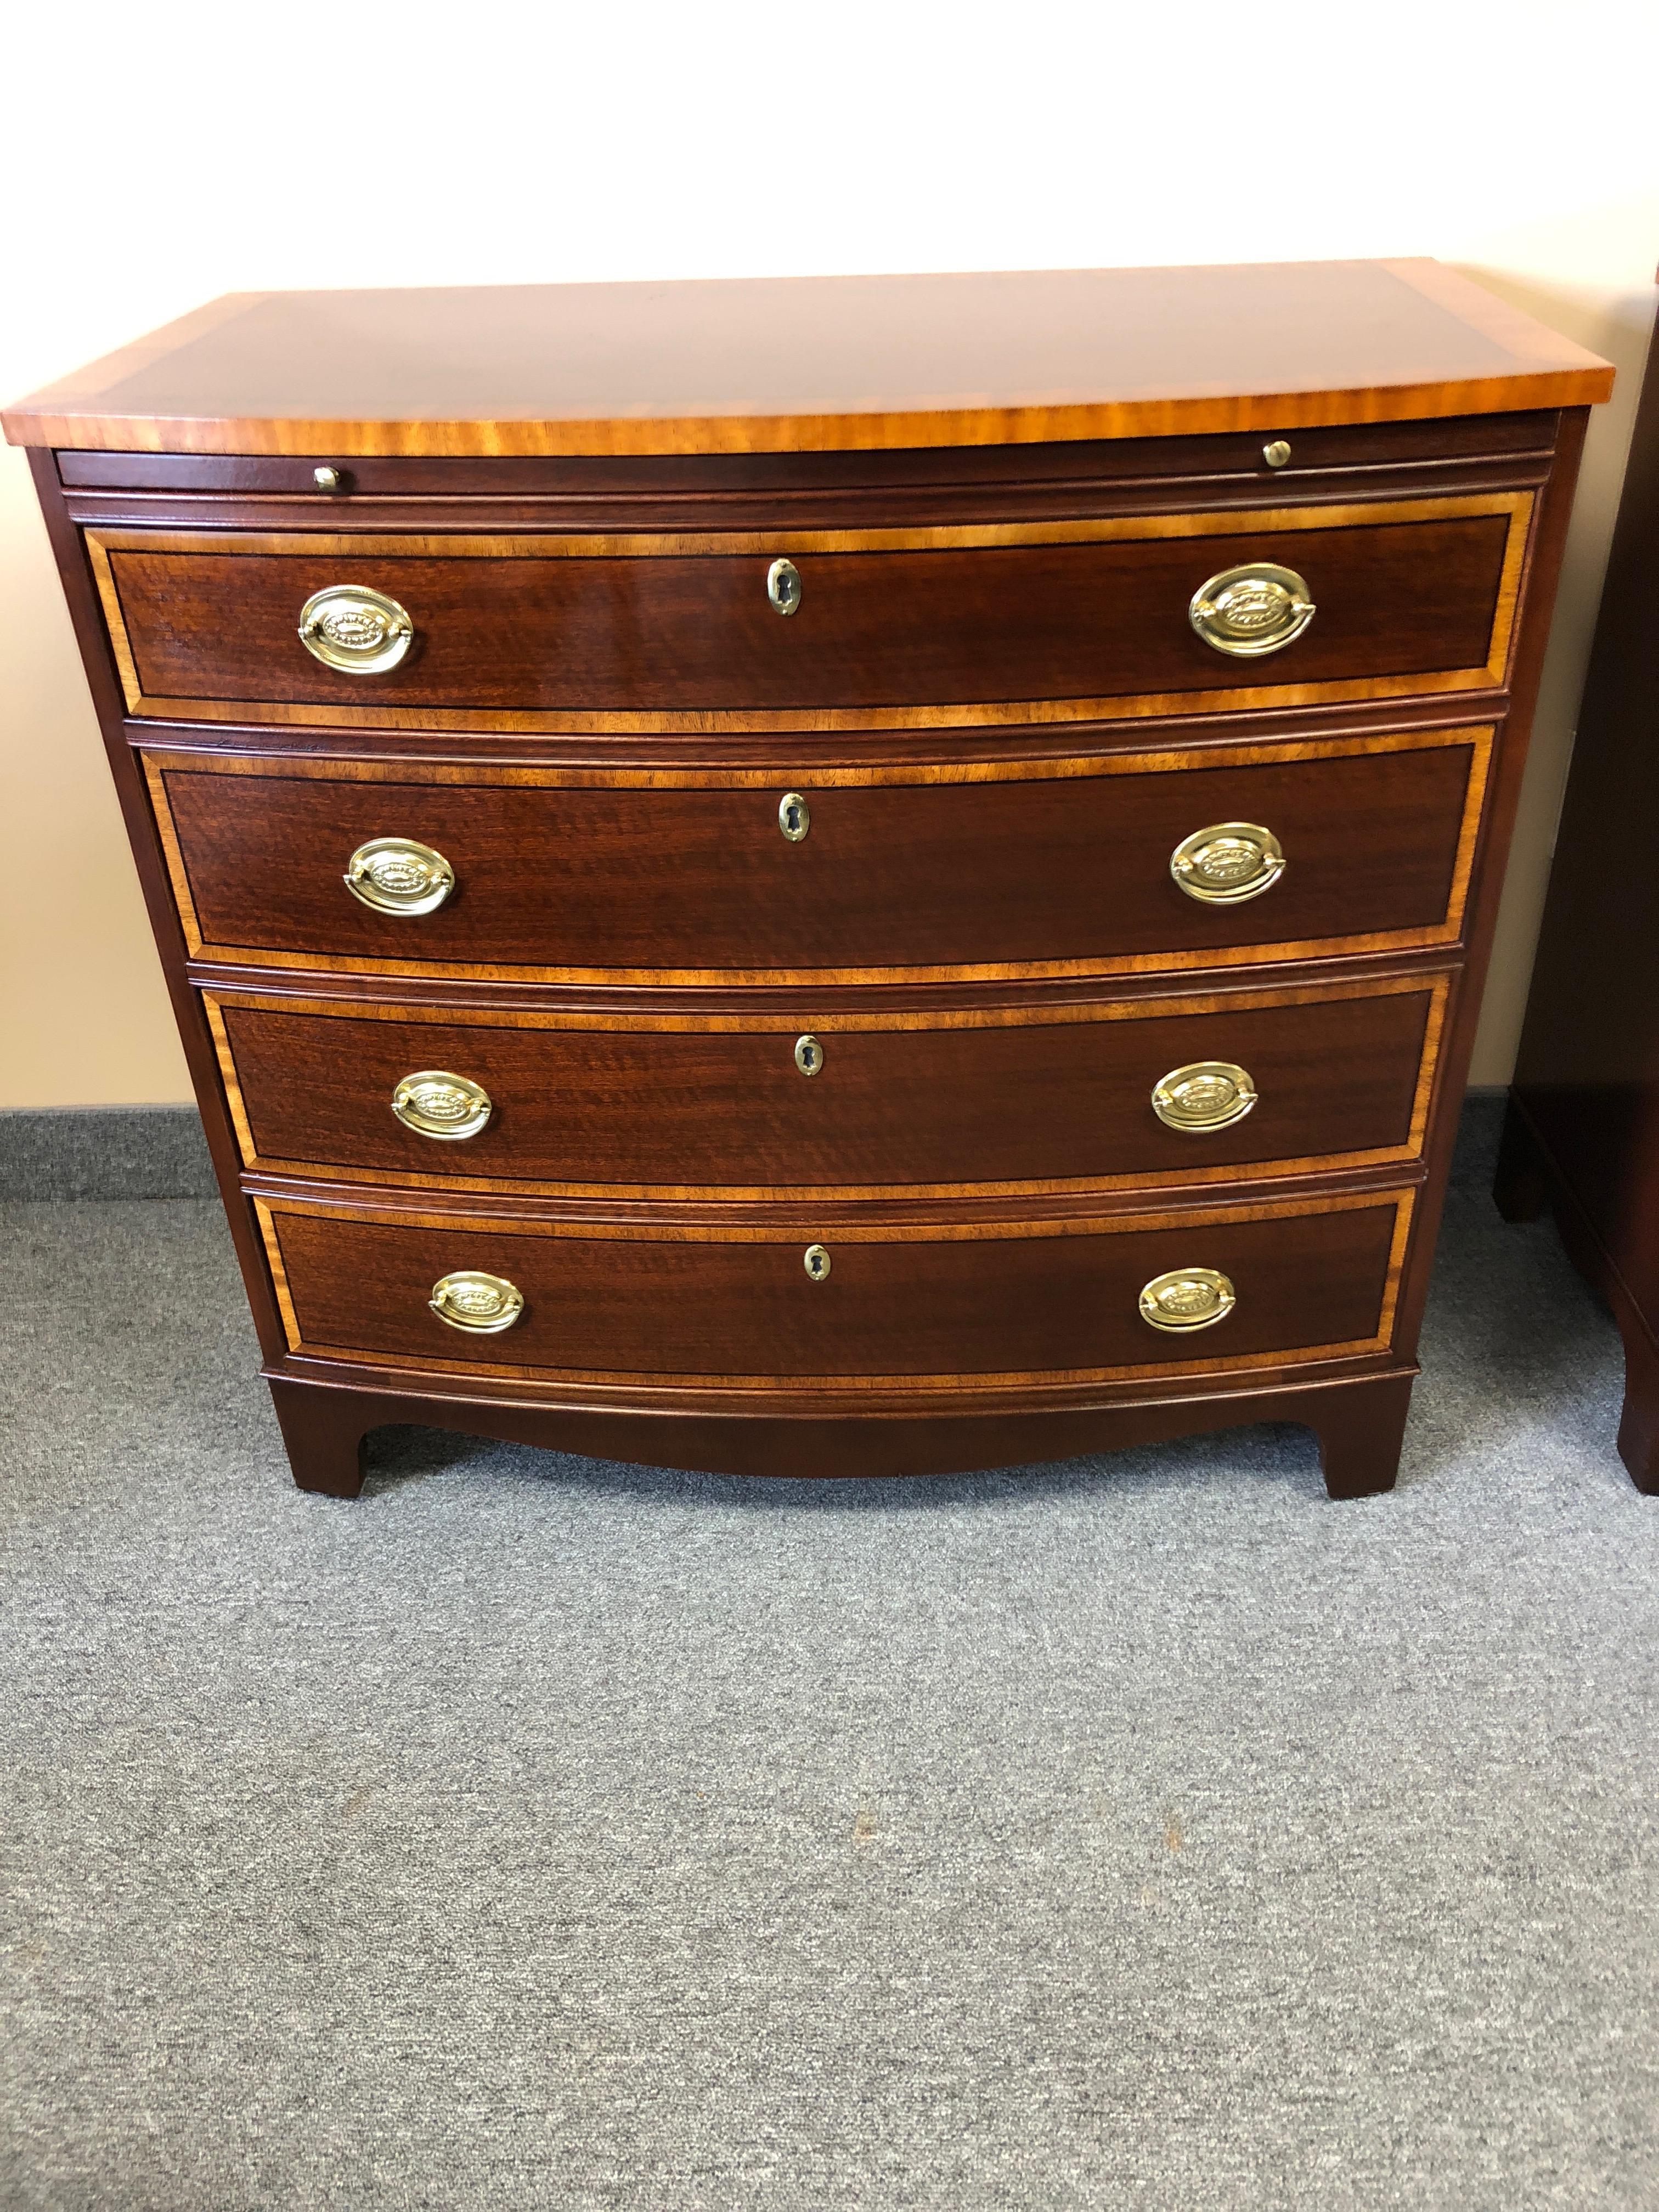 Two very handsome chests of drawers commodes by Baker, perfect as night stands, having ebony inlay and satinwood borders, a pullout / pull-out slide (10.25 deep) and 4 drawers in each.
Will sell one for $3000.